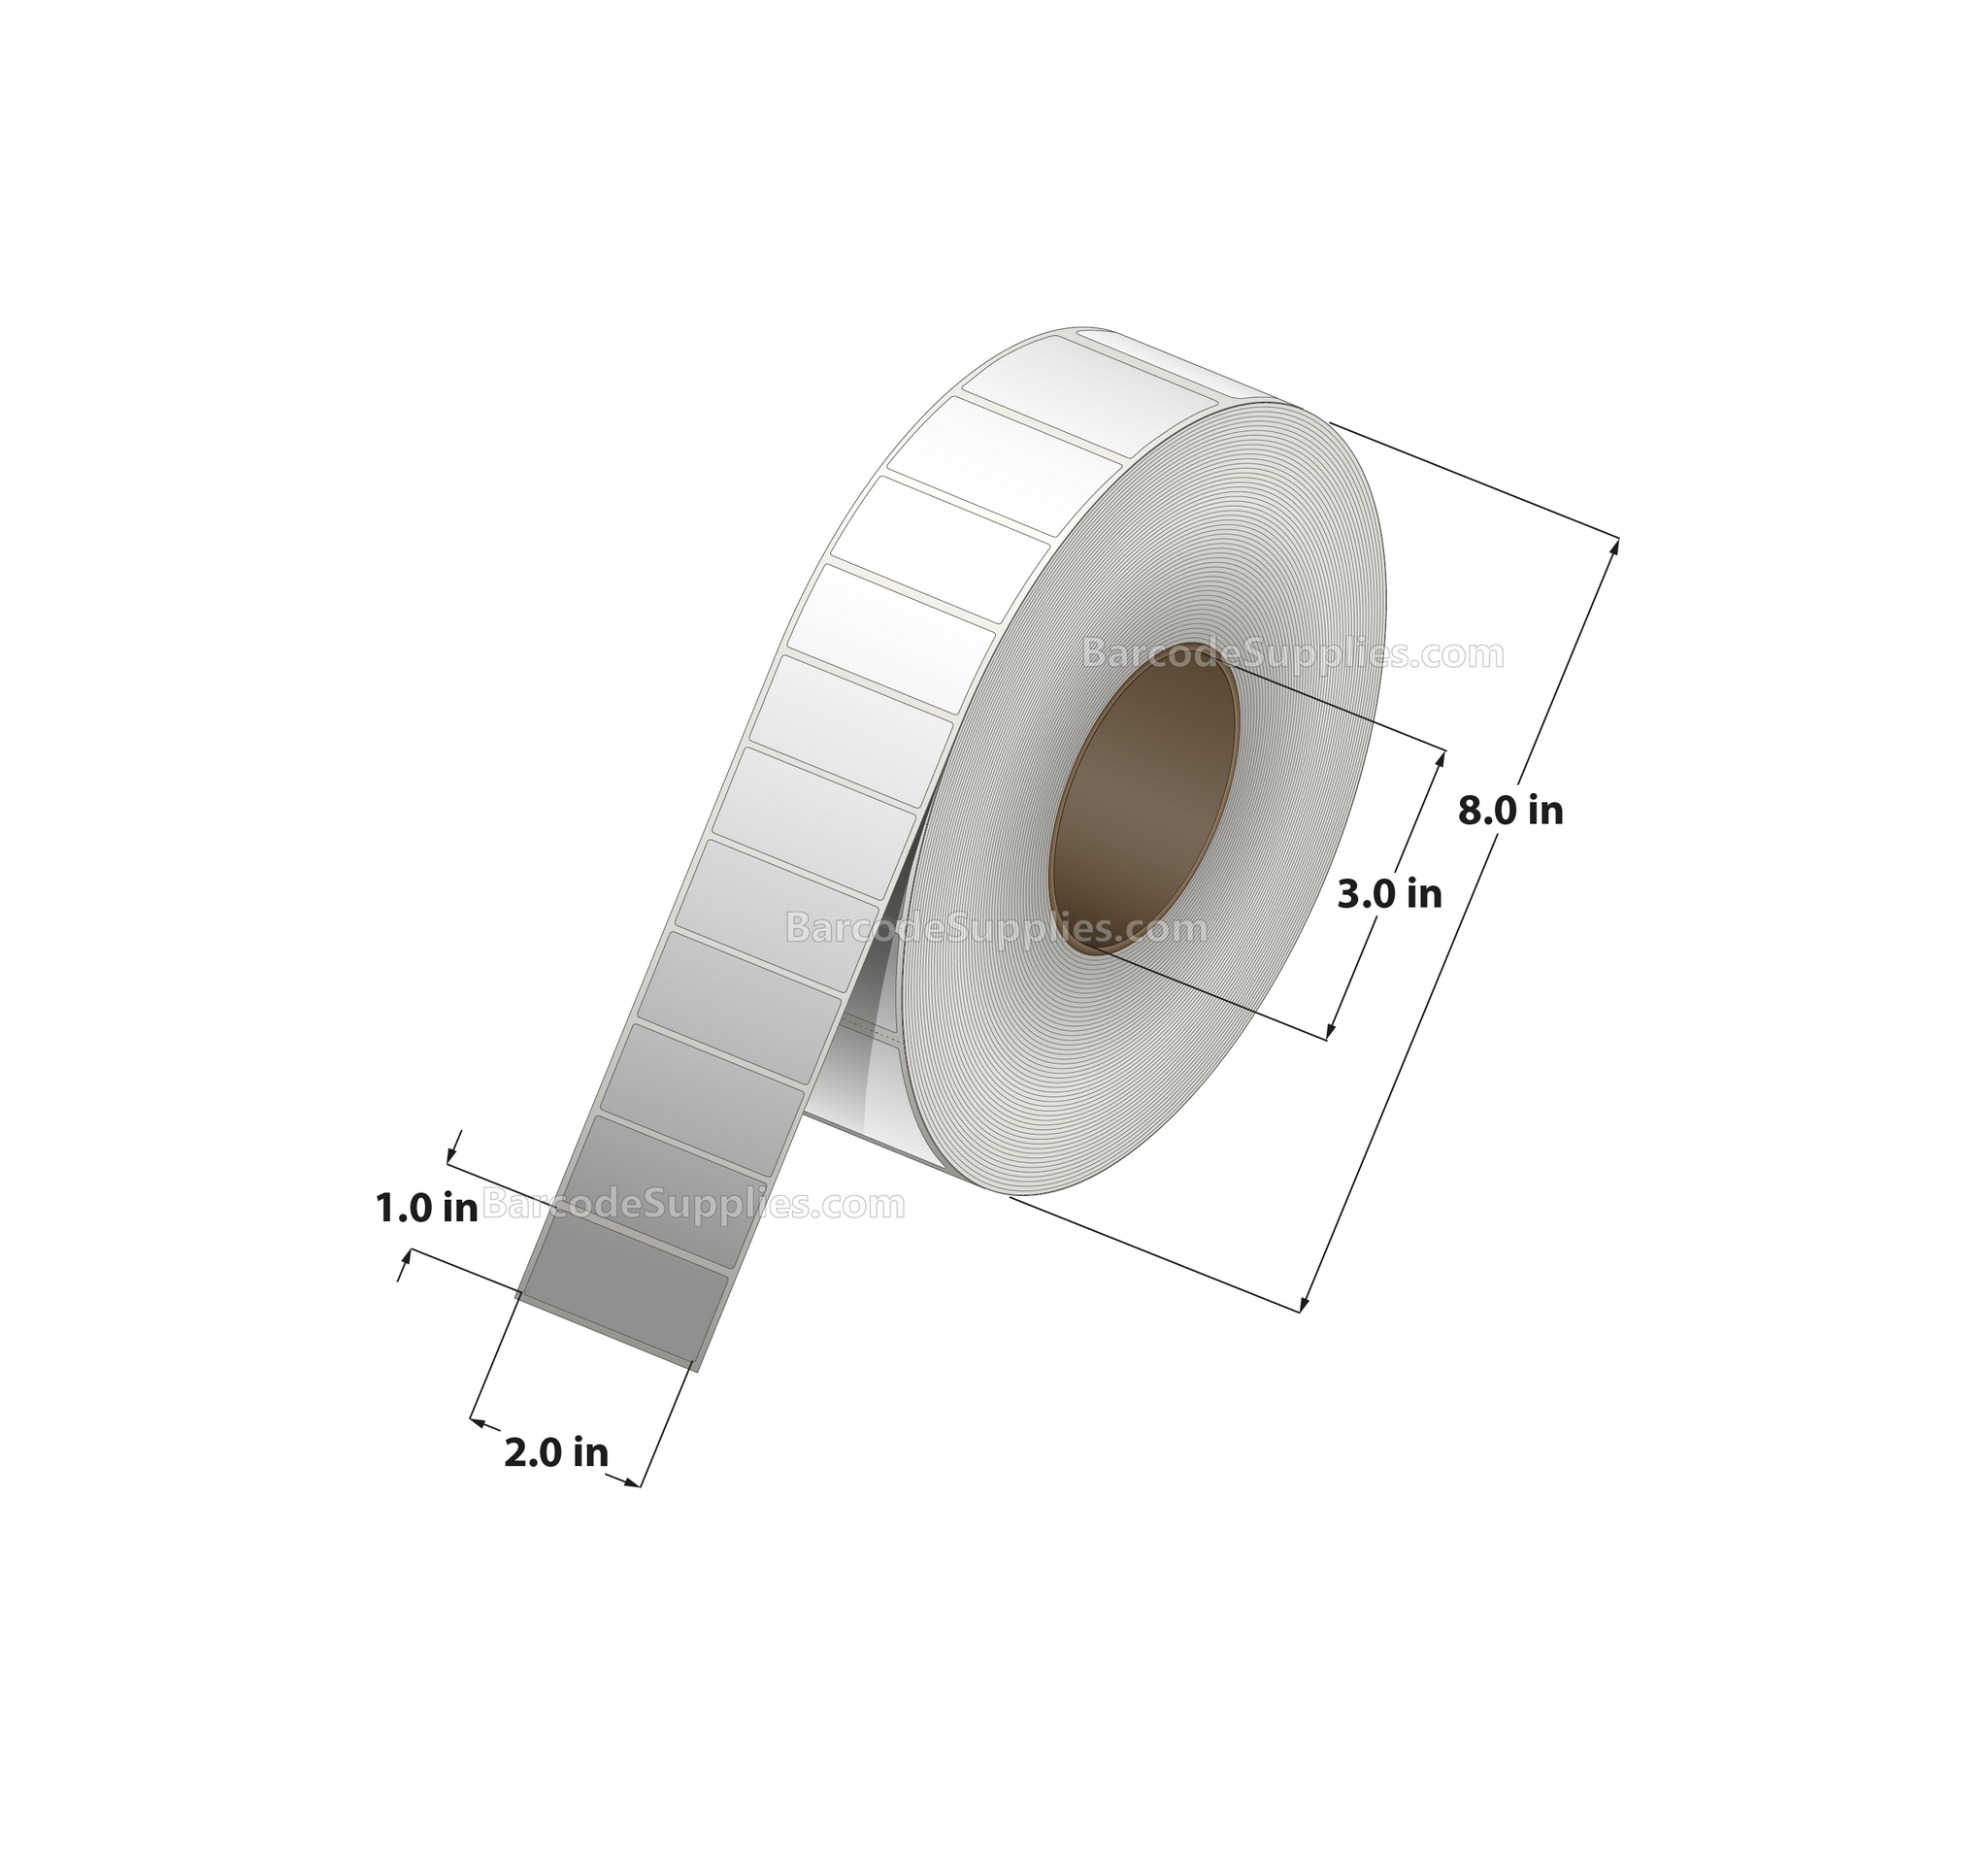 2 x 1 Direct Thermal White Labels With Acrylic Adhesive - No Perforation - 5500 Labels Per Roll - Carton Of 8 Rolls - 44000 Labels Total - MPN: RD-2-1-5500-NP - BarcodeSource, Inc.